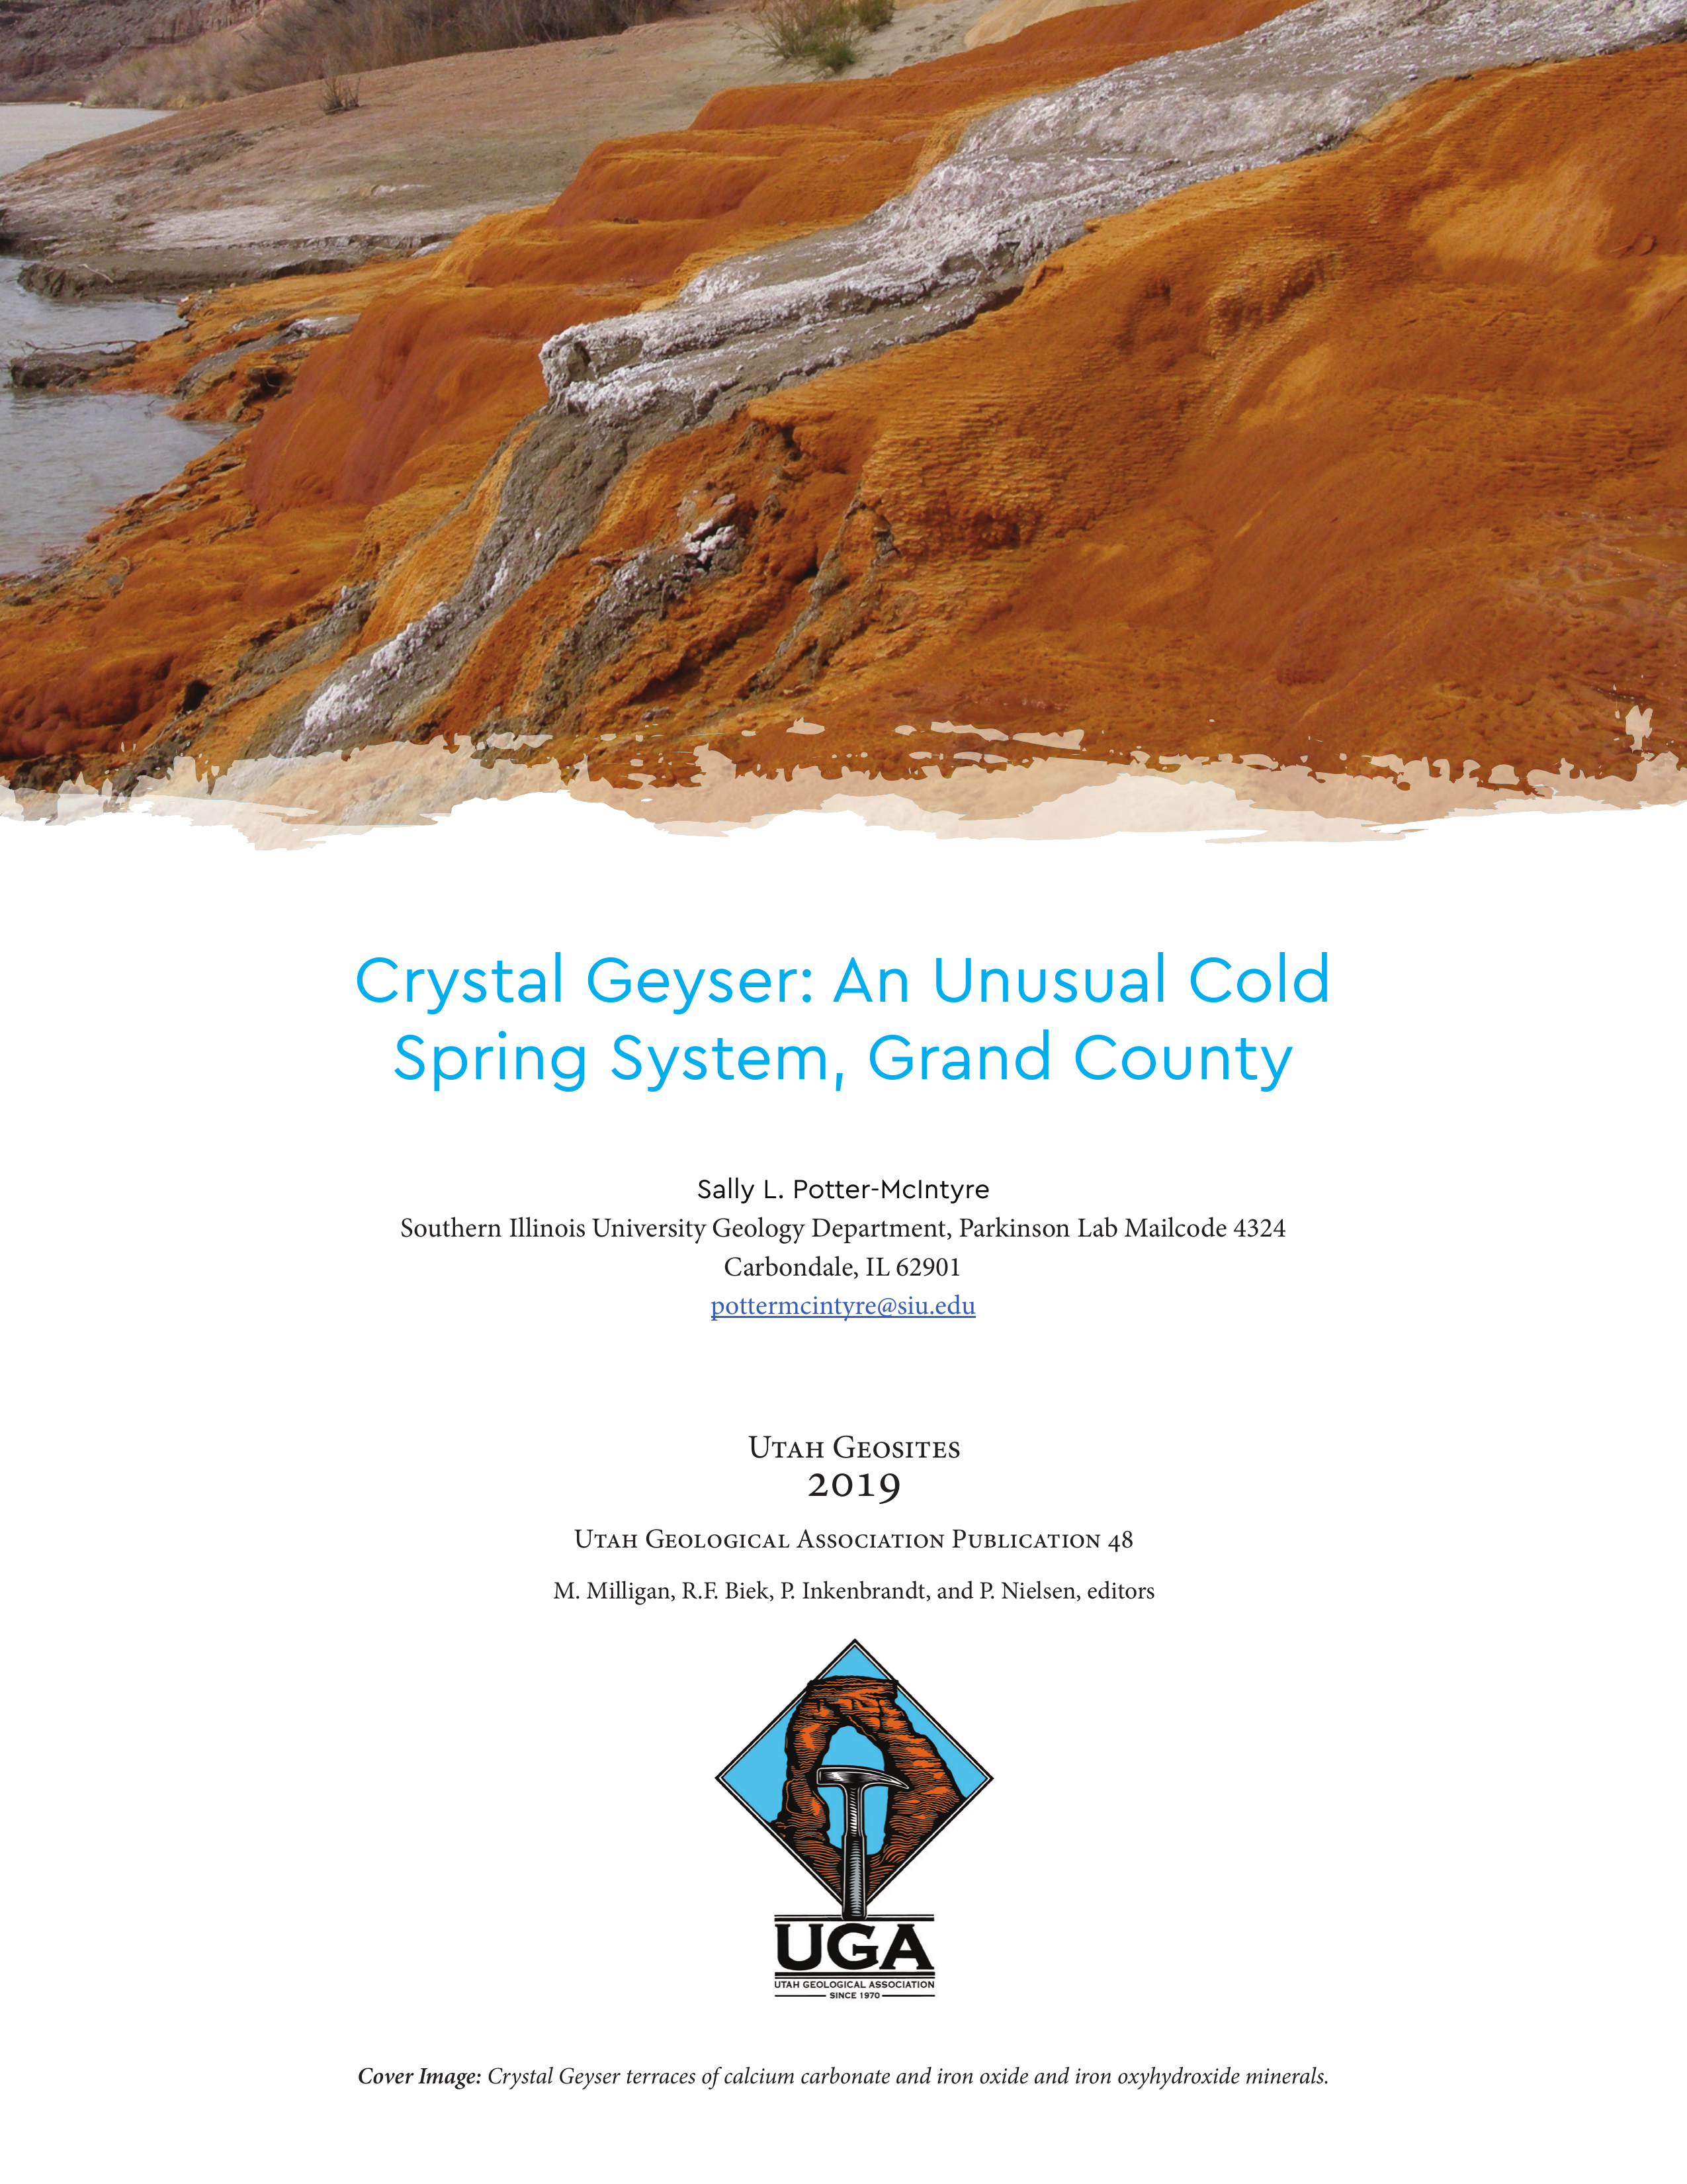 Crystal Geyser: An Unusual Cold Spring System, Grand County